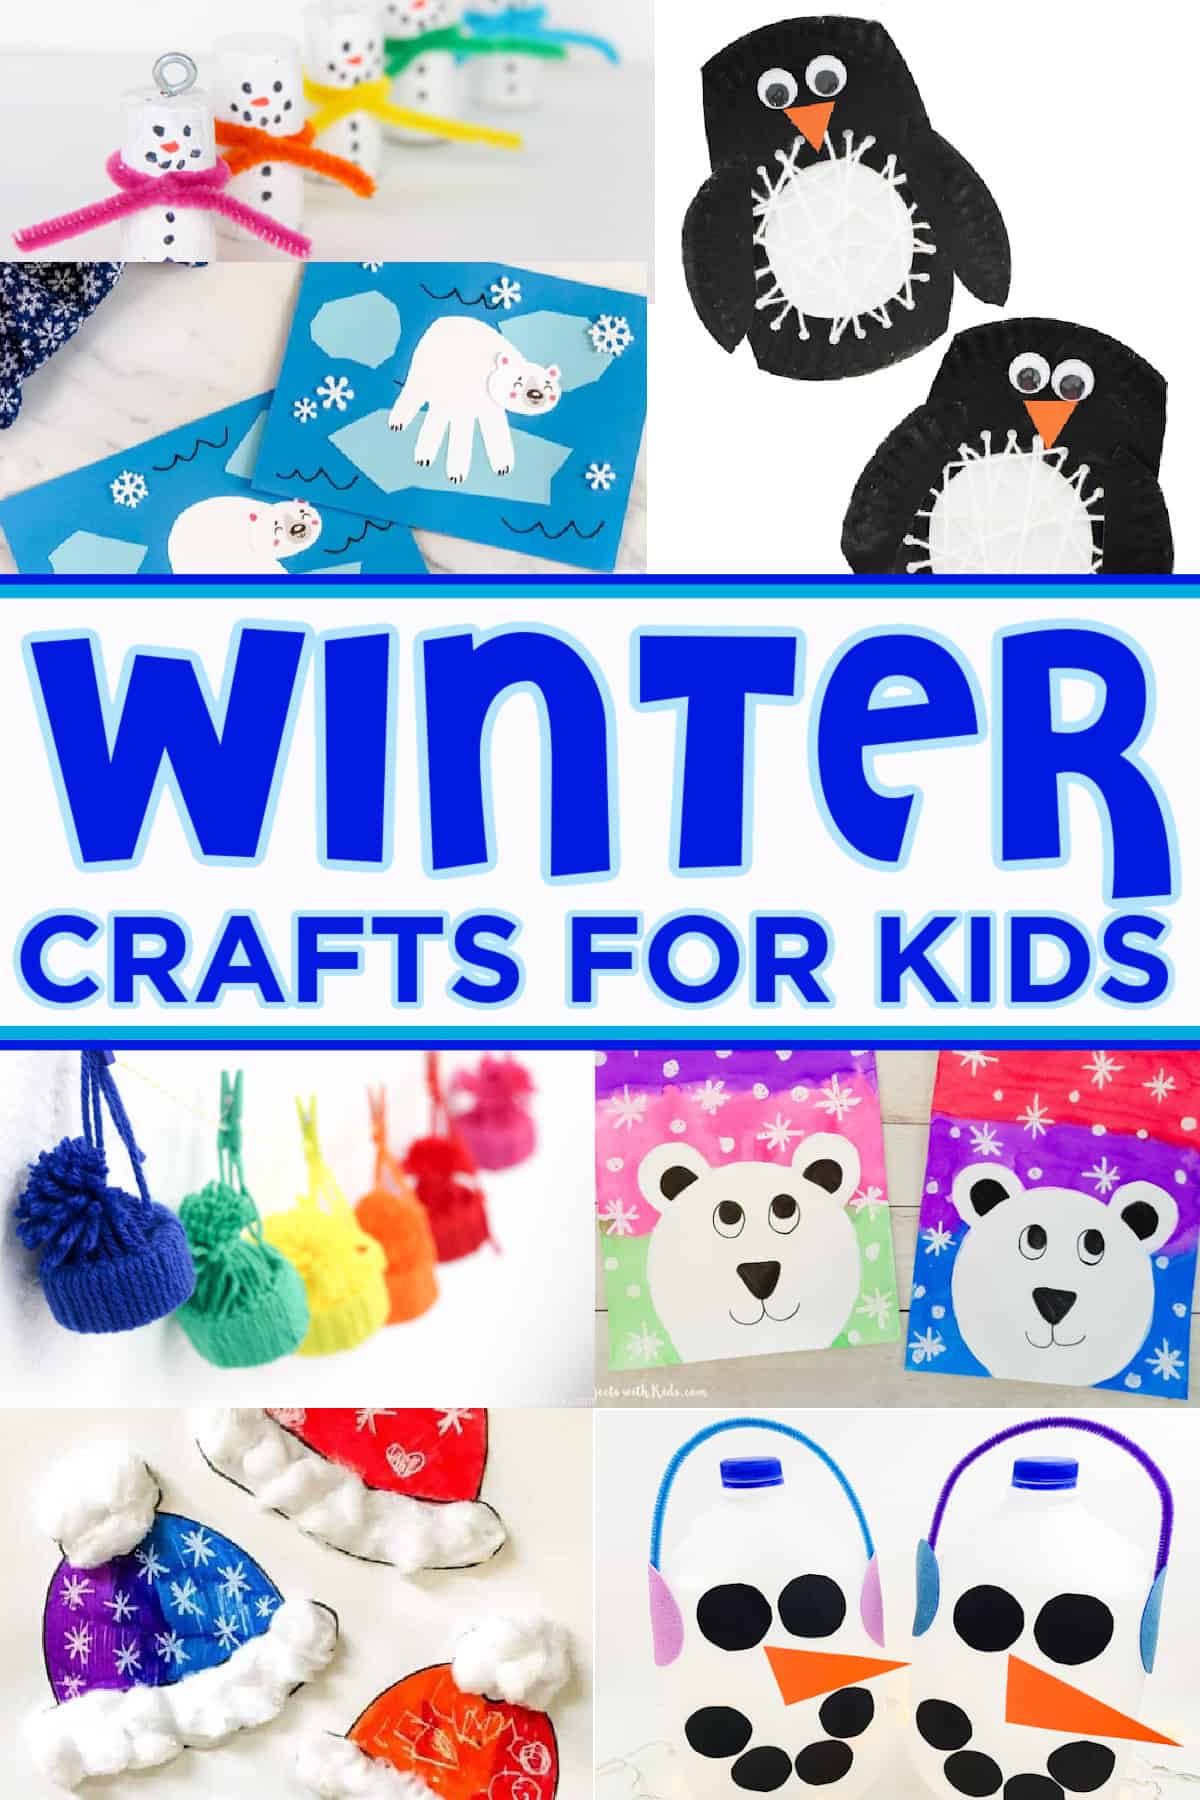 https://www.madewithhappy.com/wp-content/uploads/easy-winter-crafts.jpg